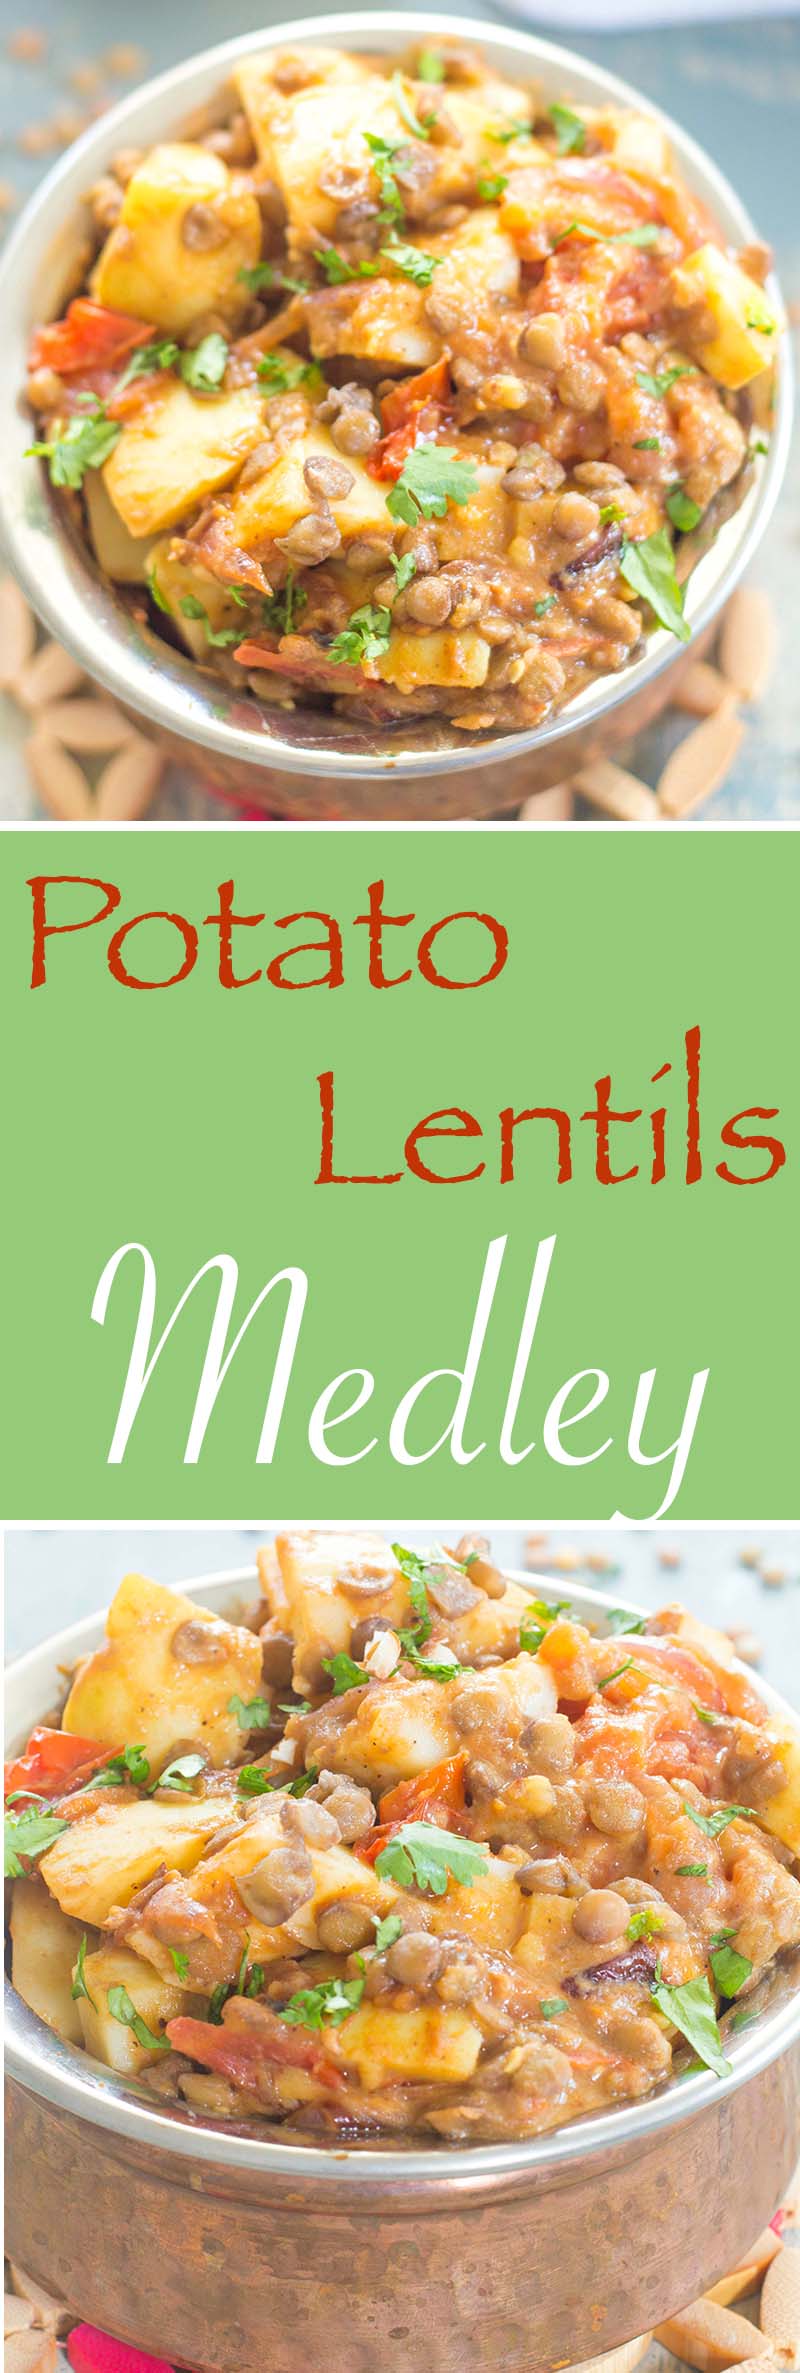 No EXOTIC SPICES REQUIRED! A simple potato lentils meal made with simple everyday ingredients. Perfect vegan lunch or dinner meal packed with protein power